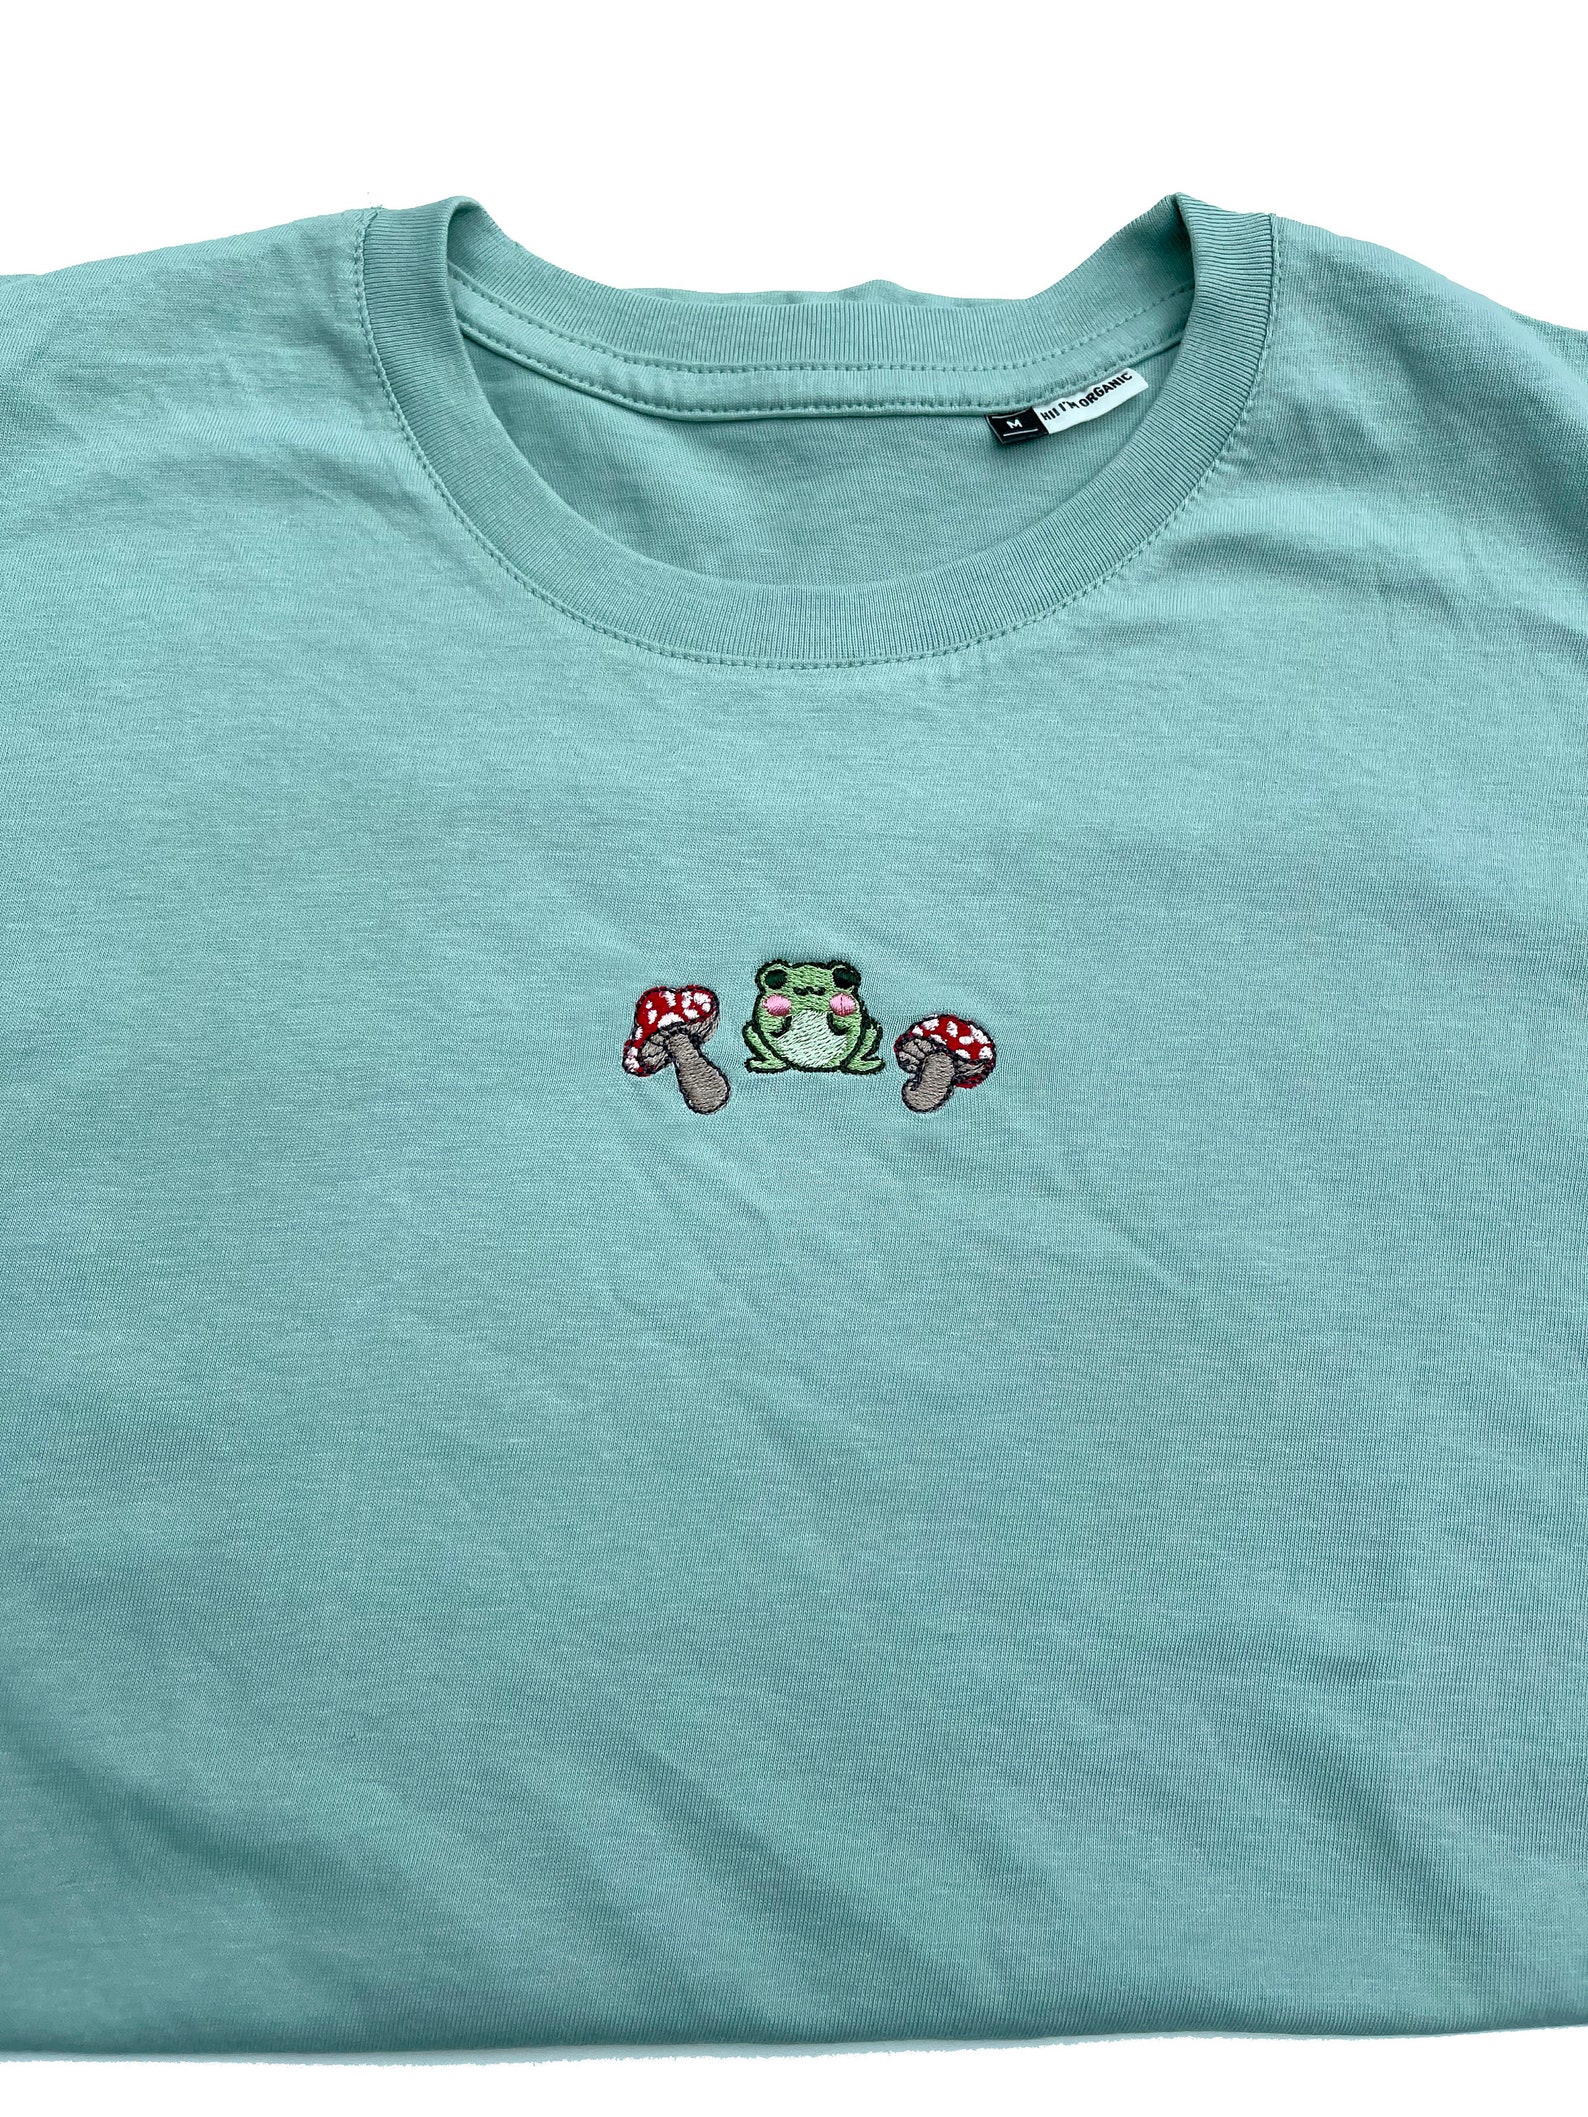 Adorable Embroidered Frog and Mushroom T Shirt | Etsy